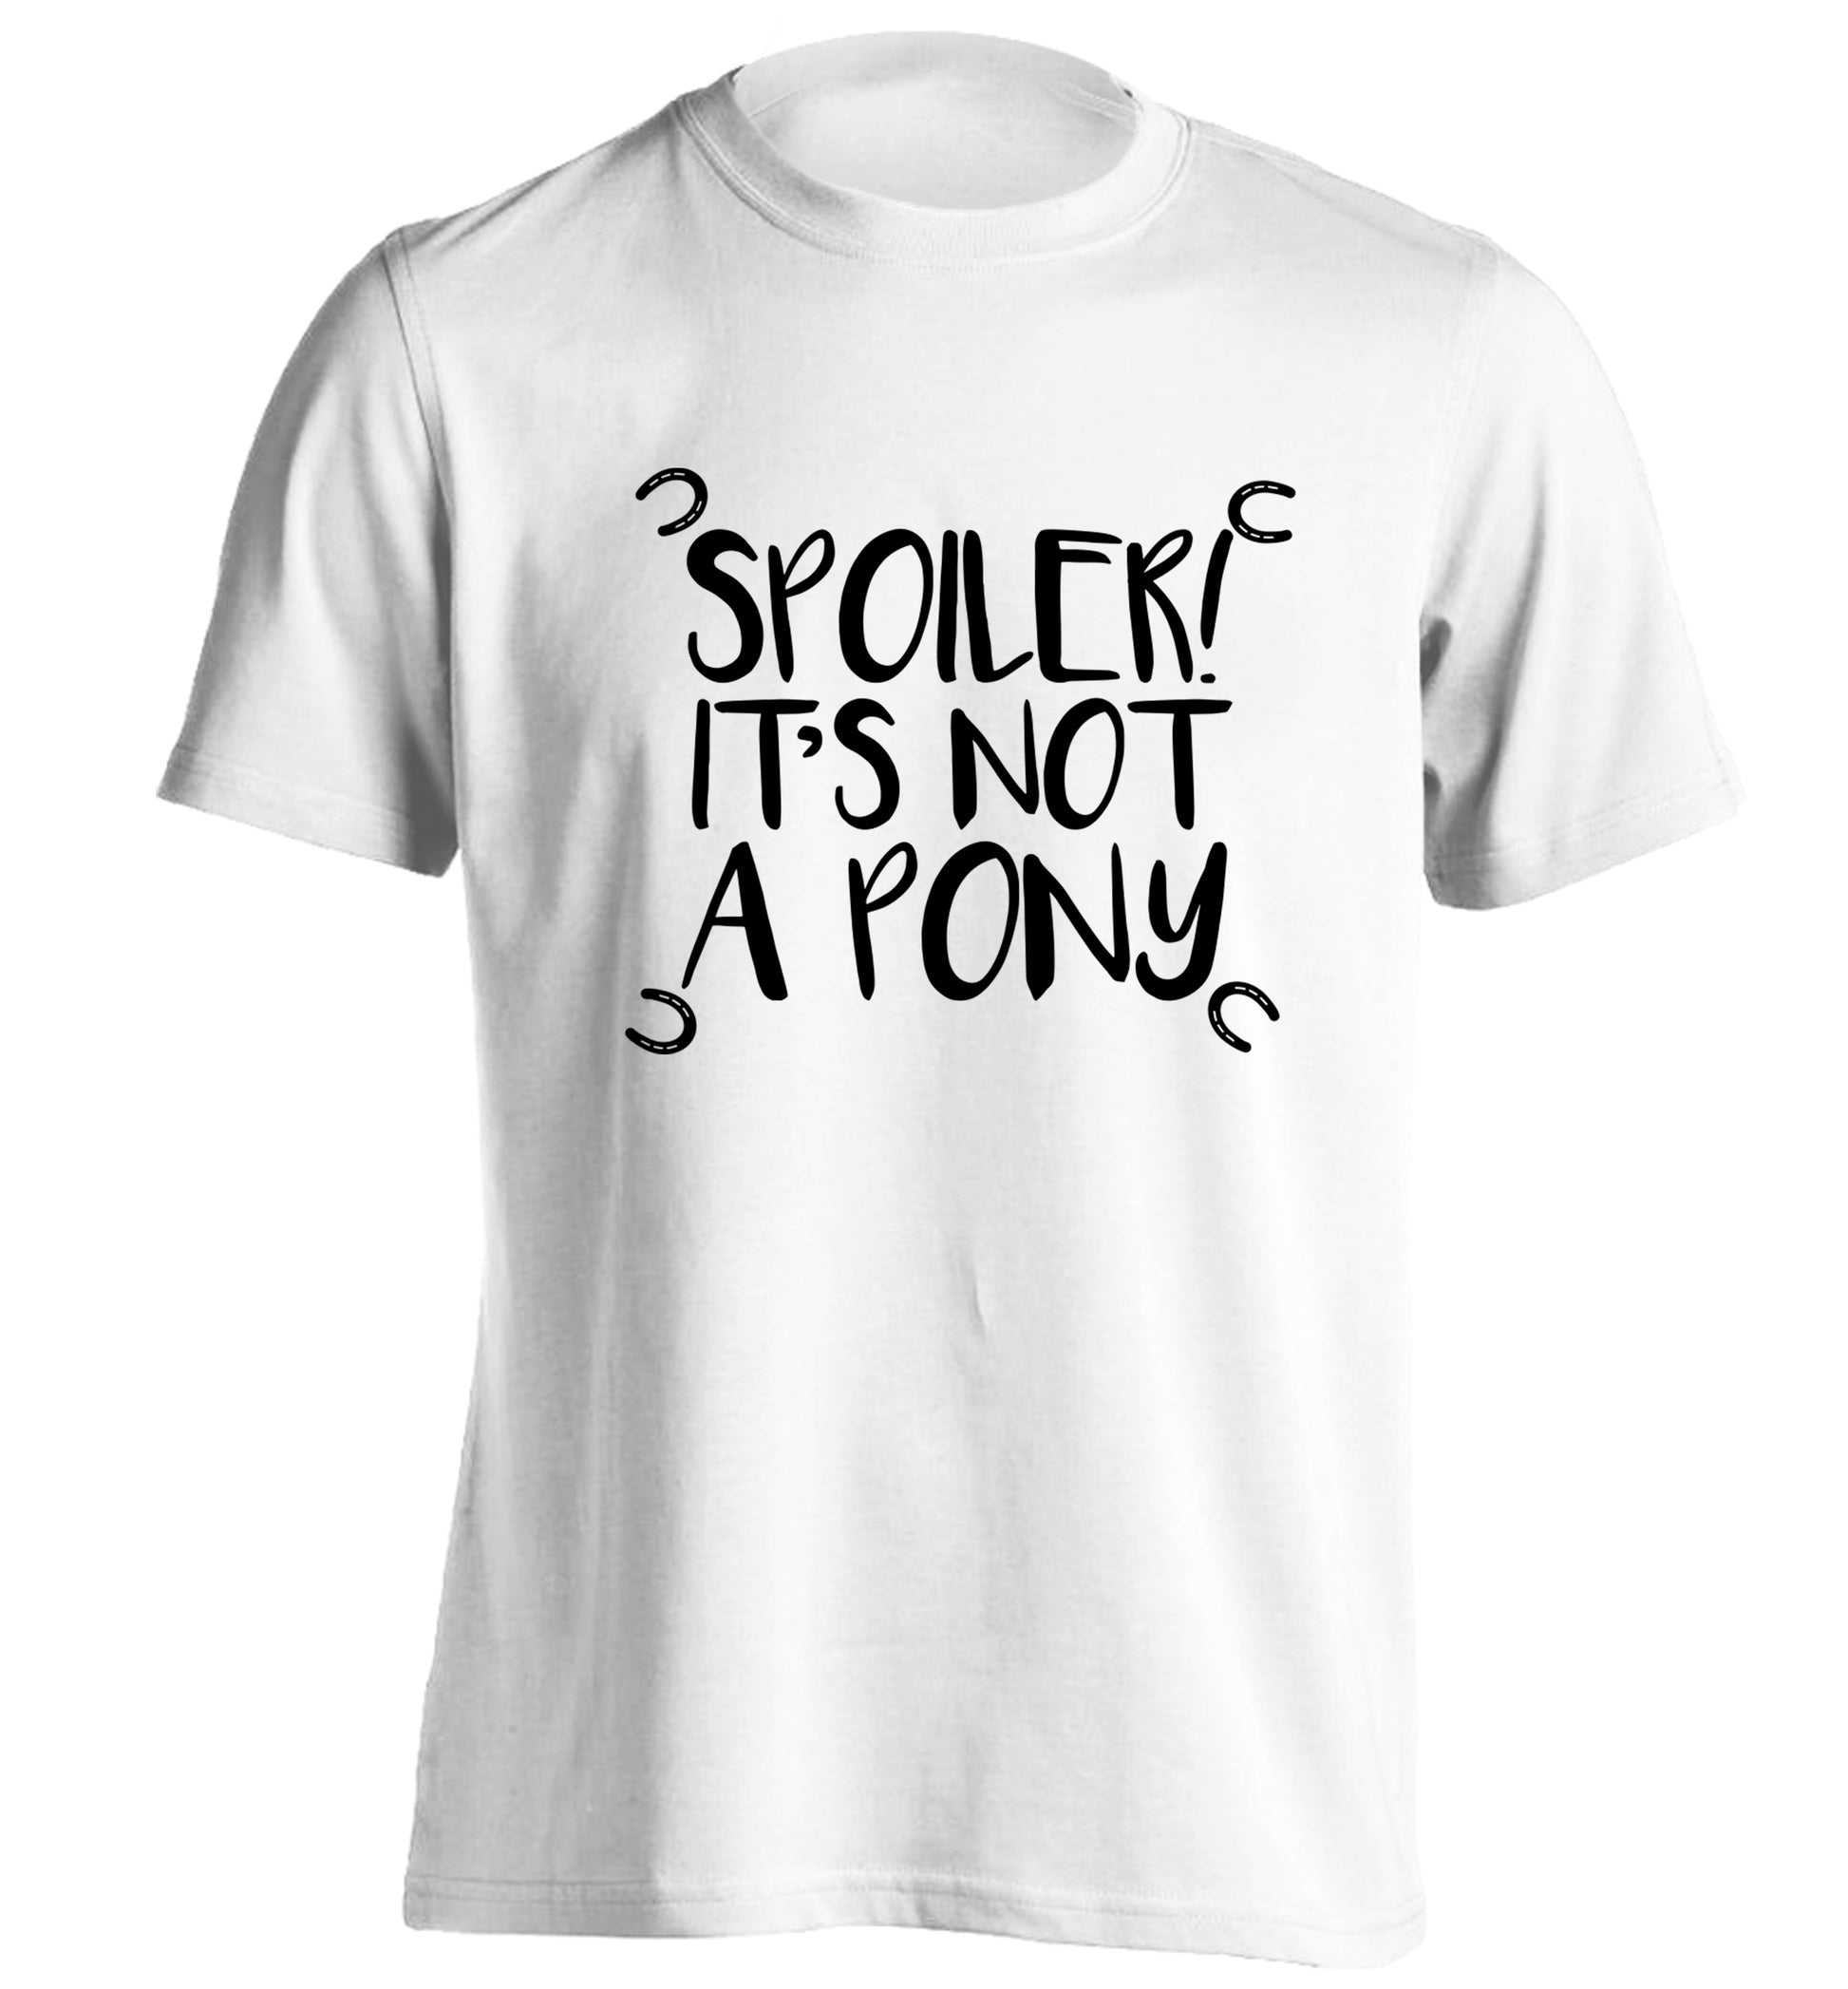 Spoiler it's not a pony adults unisex white Tshirt 2XL